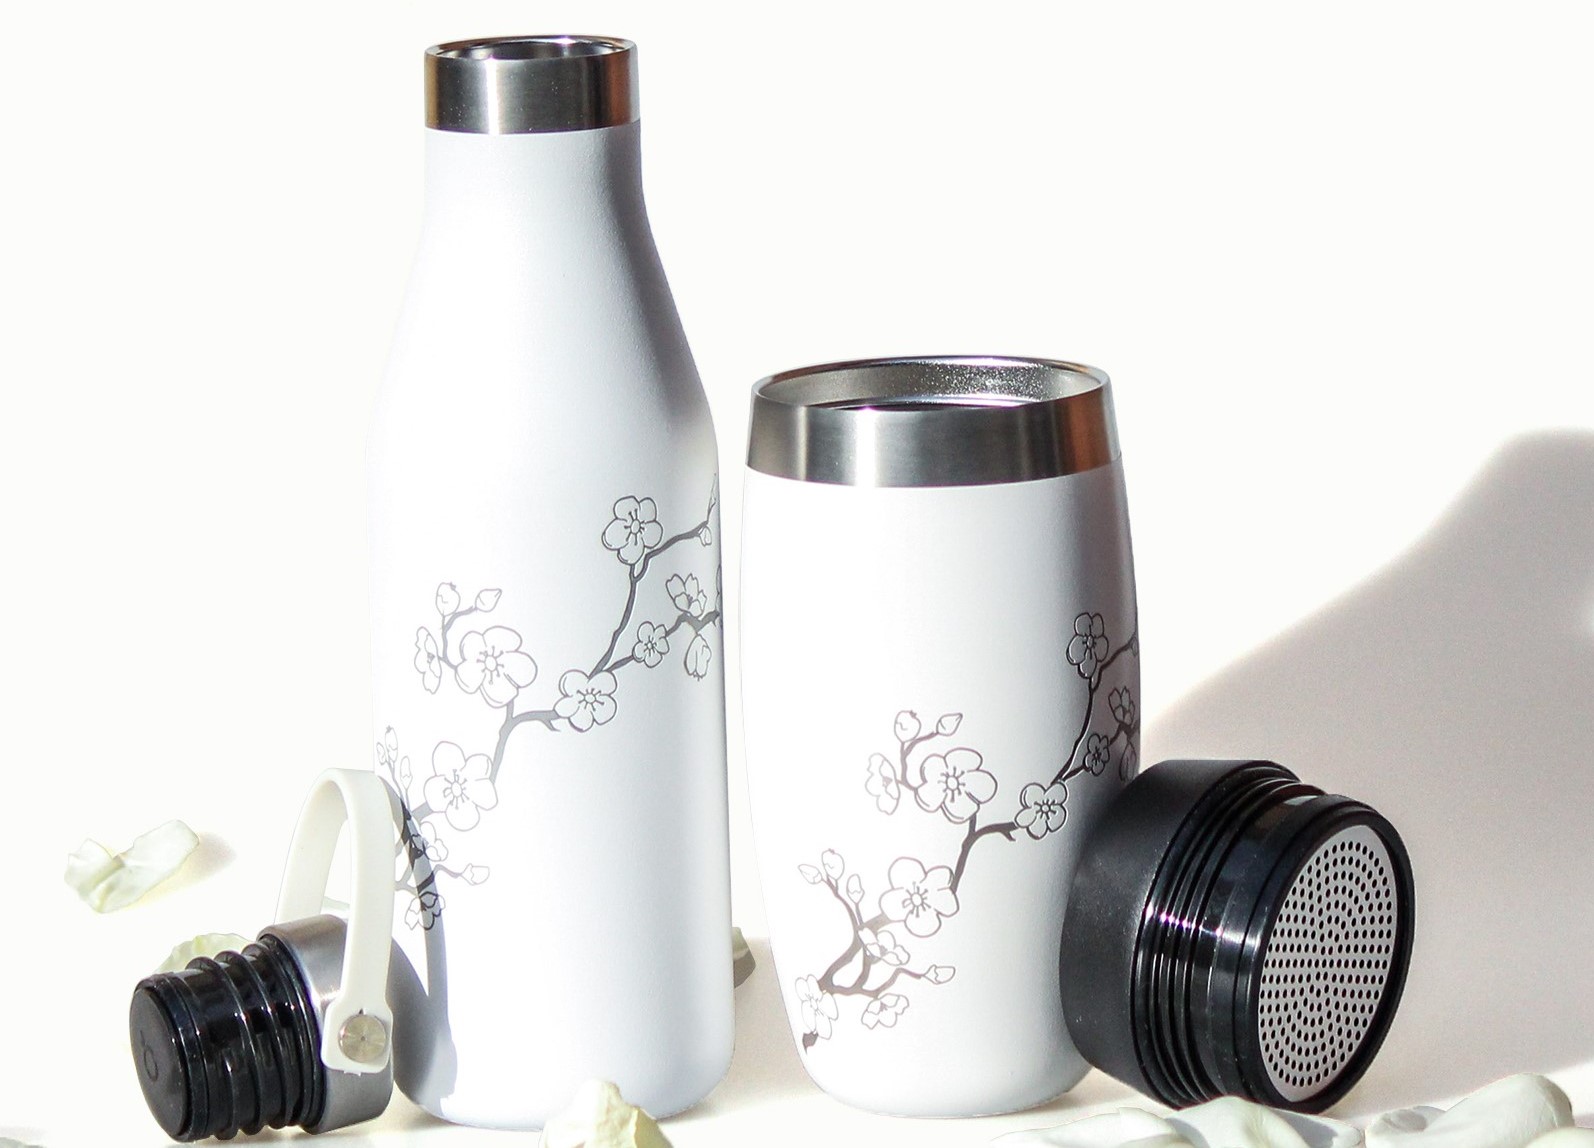 Cherry blossom Ohelo sustainable bottle and tumbler for consumers designed by Simple Design Works in West Midlands